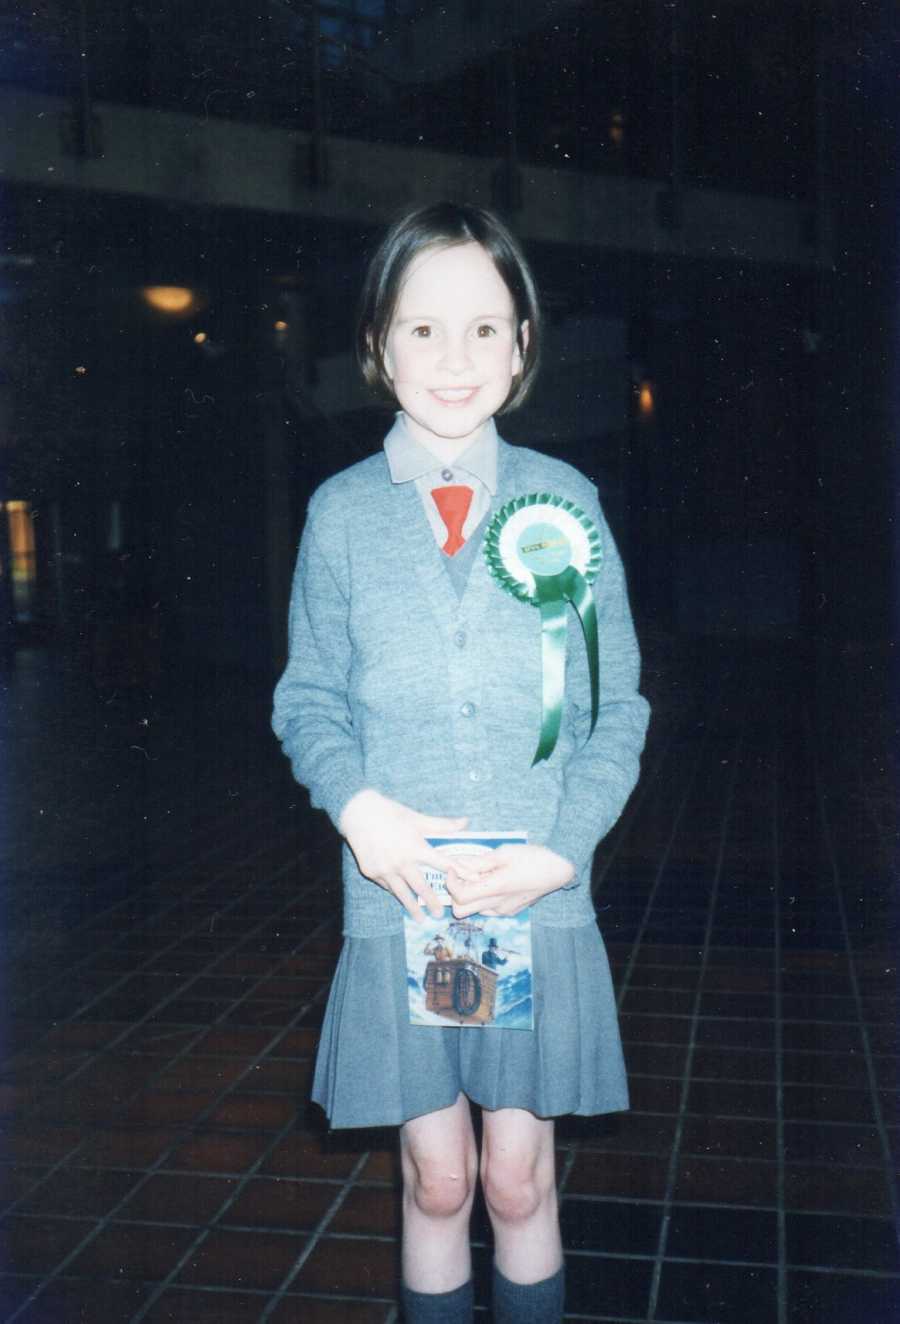 Young girl with Exomphalos stands in school uniform with green and white ribbon on her chest